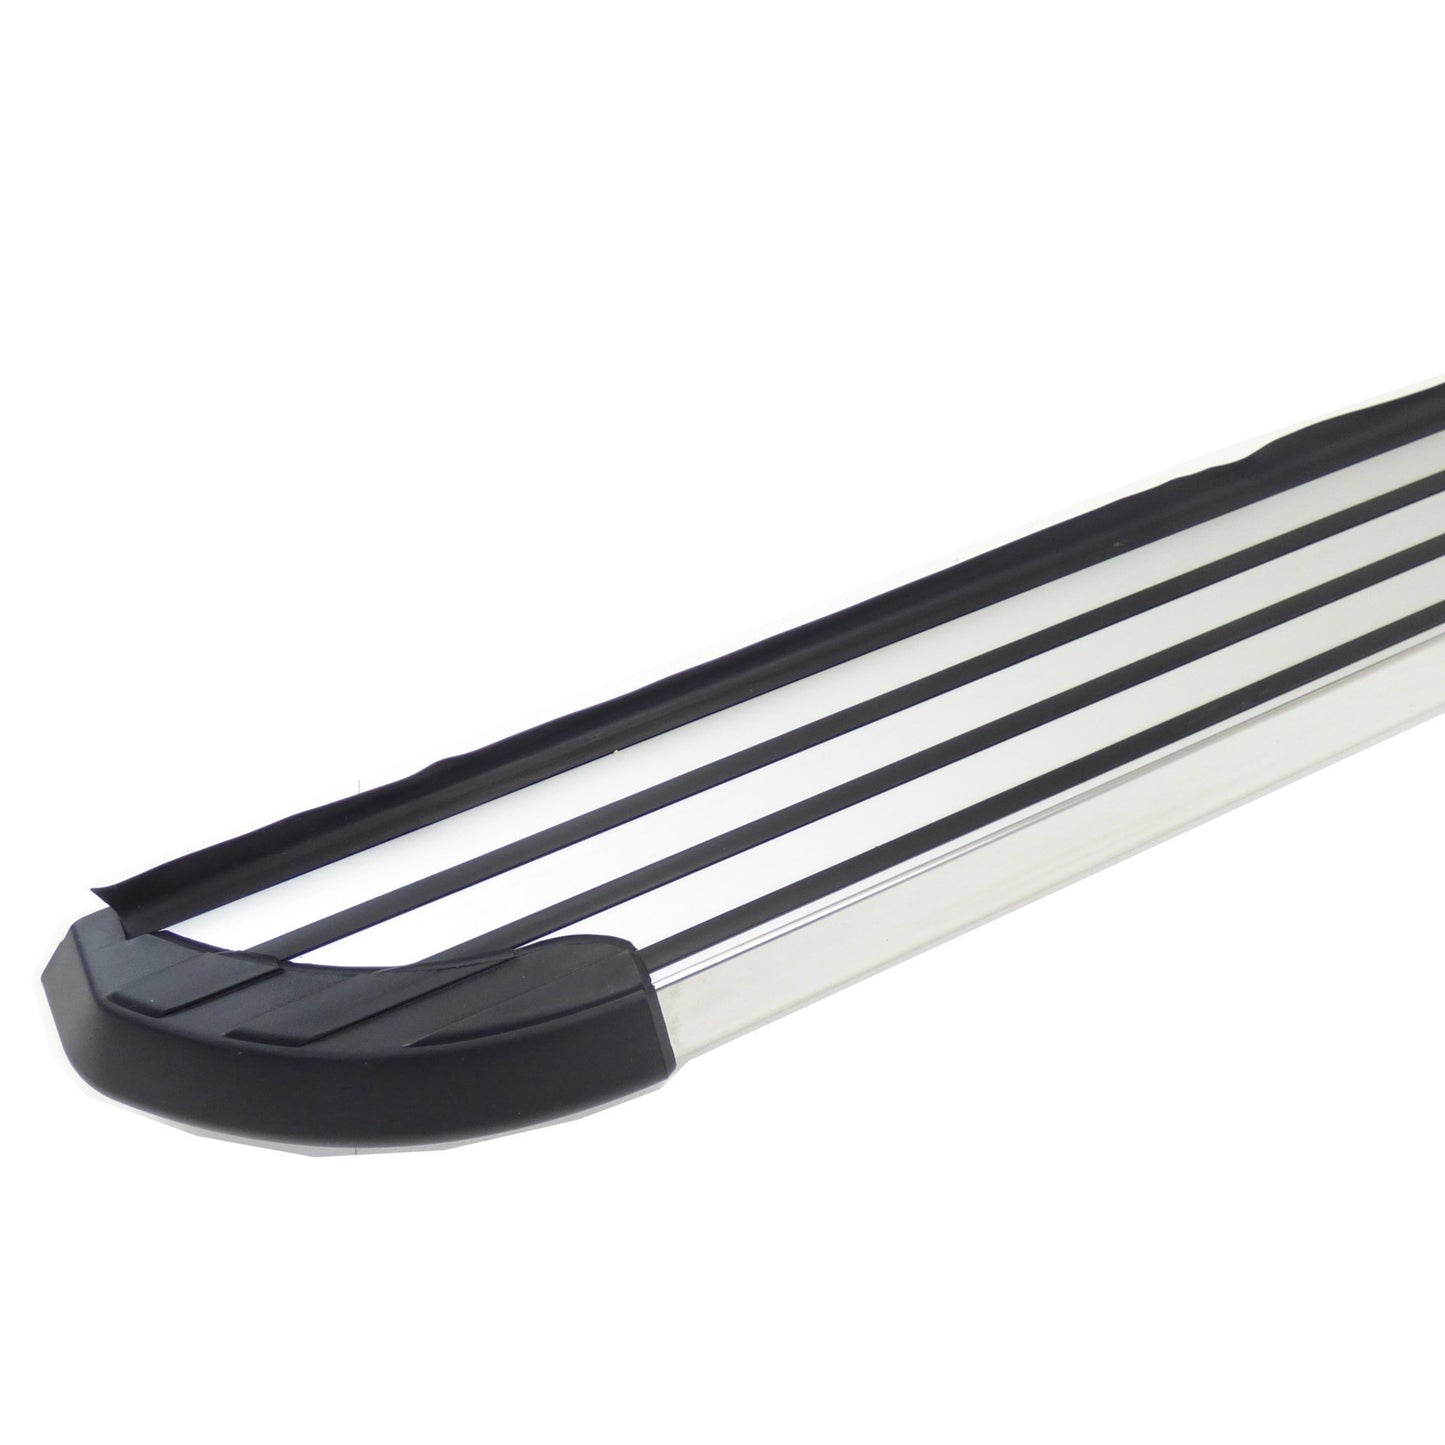 Stingray Side Steps Running Boards for Range Rover Evoque Pure & Prestige 11-18 -  - sold by Direct4x4